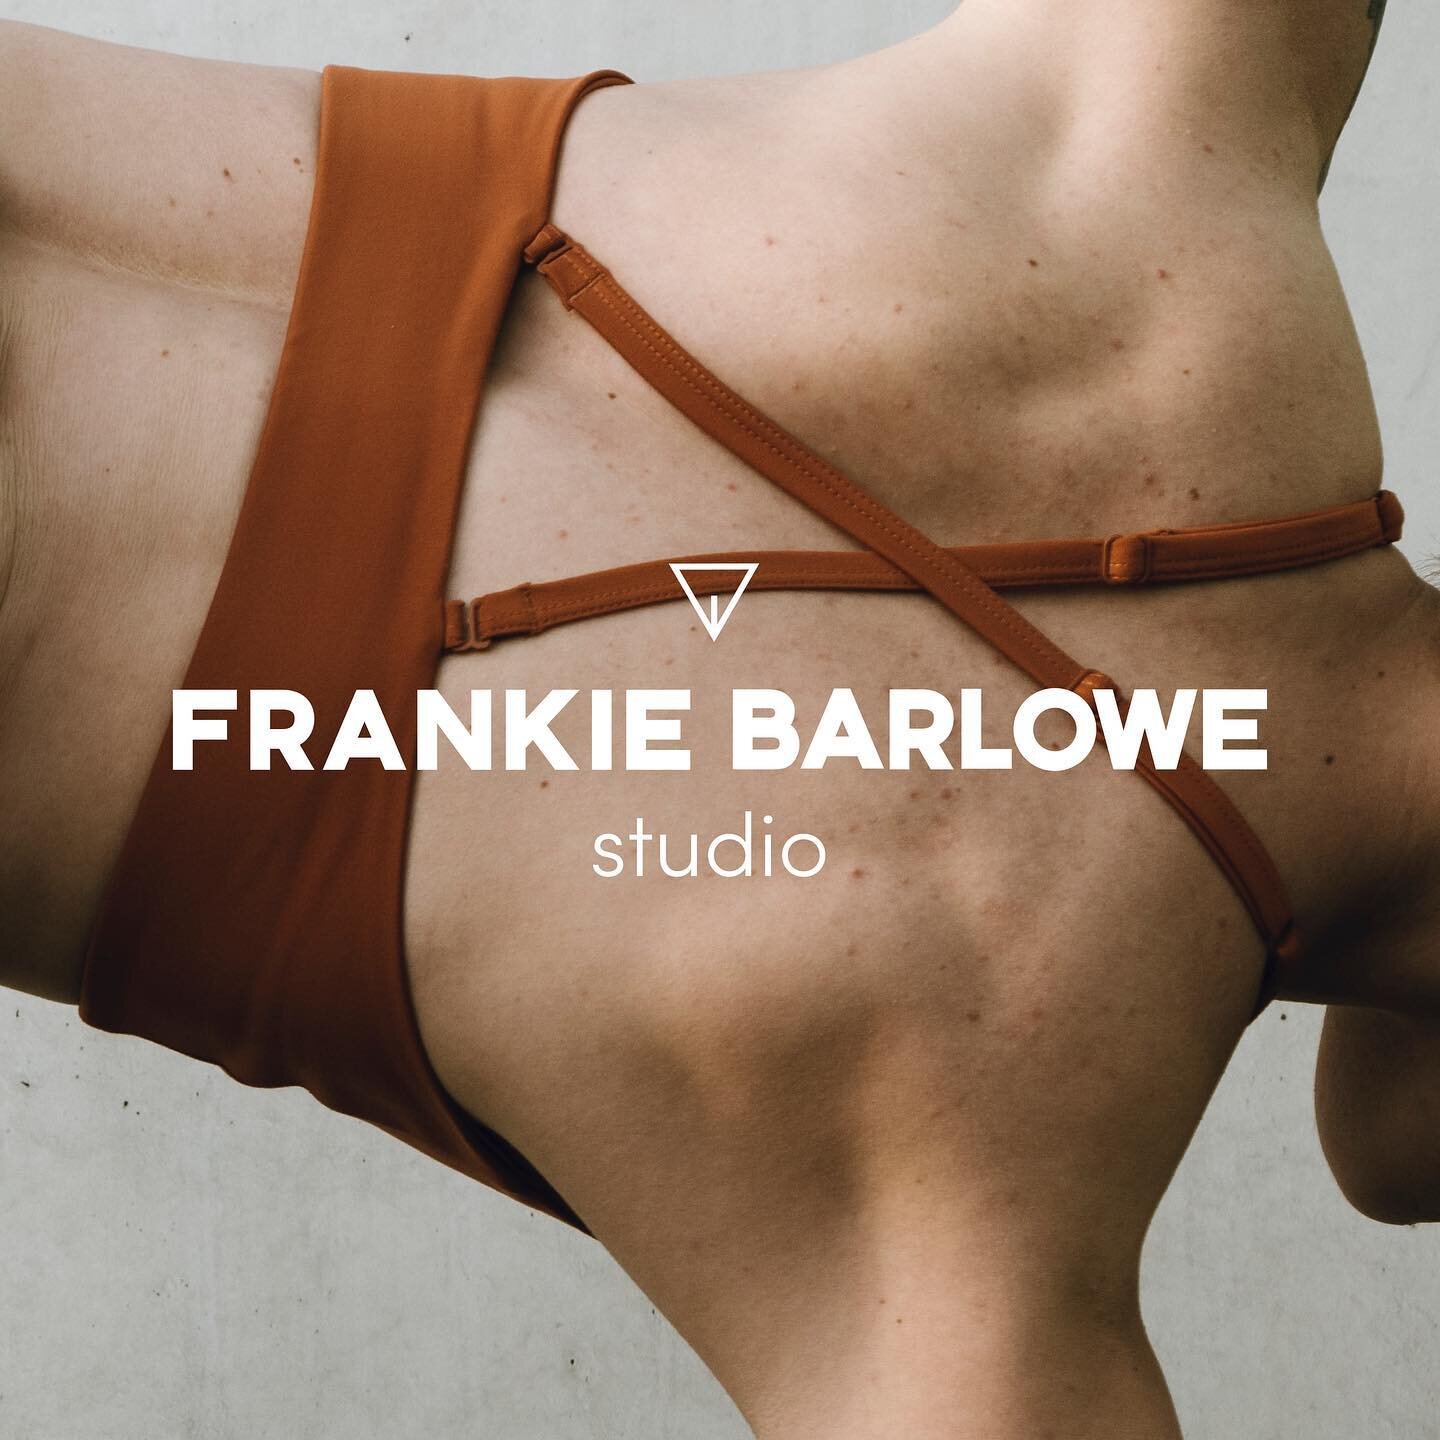 Frankie Barlowe - Fitness &amp; Wellness ✨🧘🏻&zwj;♀️

This weeks draft for @hellotayloramy #briefbabes 🤞🏼☺️

It was so much to work with a different type of font than usual. I usually like to use playful and elegant serif fonts, but I felt like th